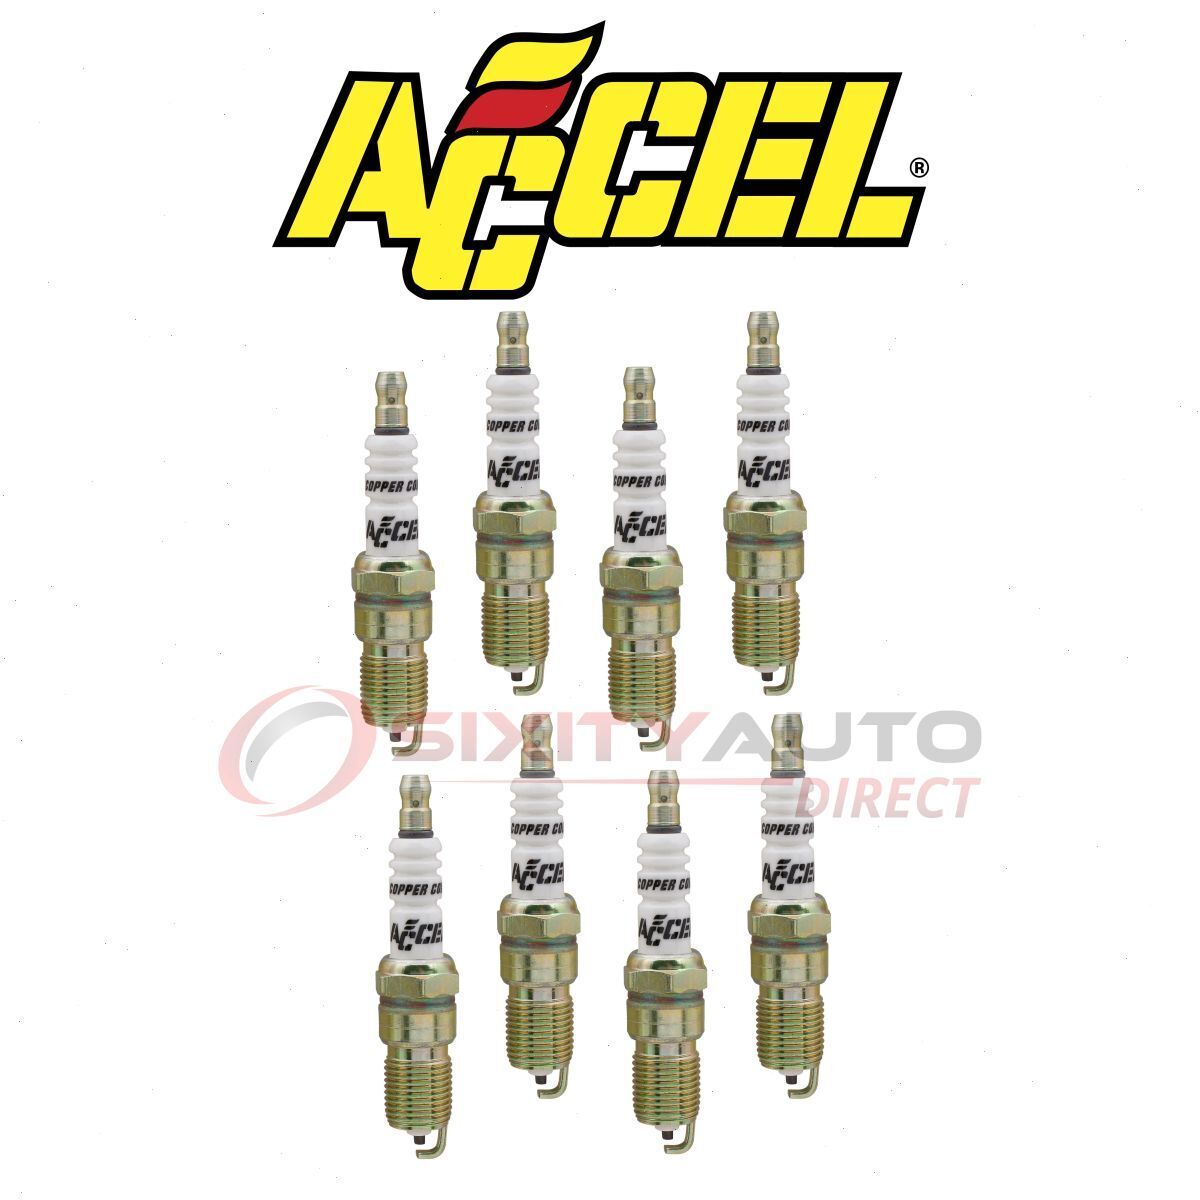 ACCEL Spark Plug for 1994-2003 Ford Mustang - Ignition Secondary  qr